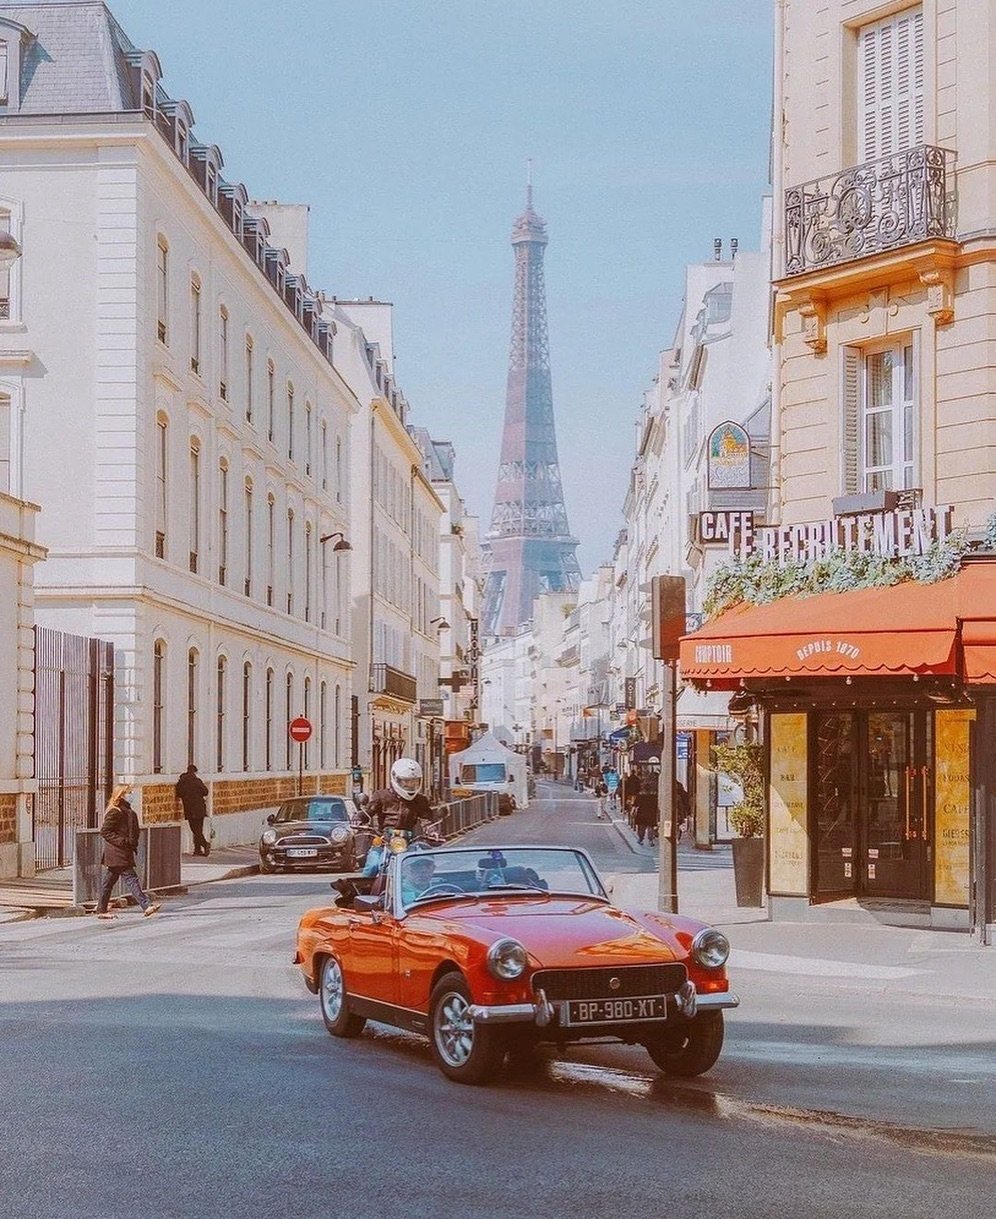 LETS GO CRUISING IN THE CITY OF LIGHT 🇫🇷

Find out where to park your car to have lunch, dinner, or drinks on The Bearleaders Guide of Paris on Bearleaders.com or link in bio. 

Photograph credits go to @evenskild